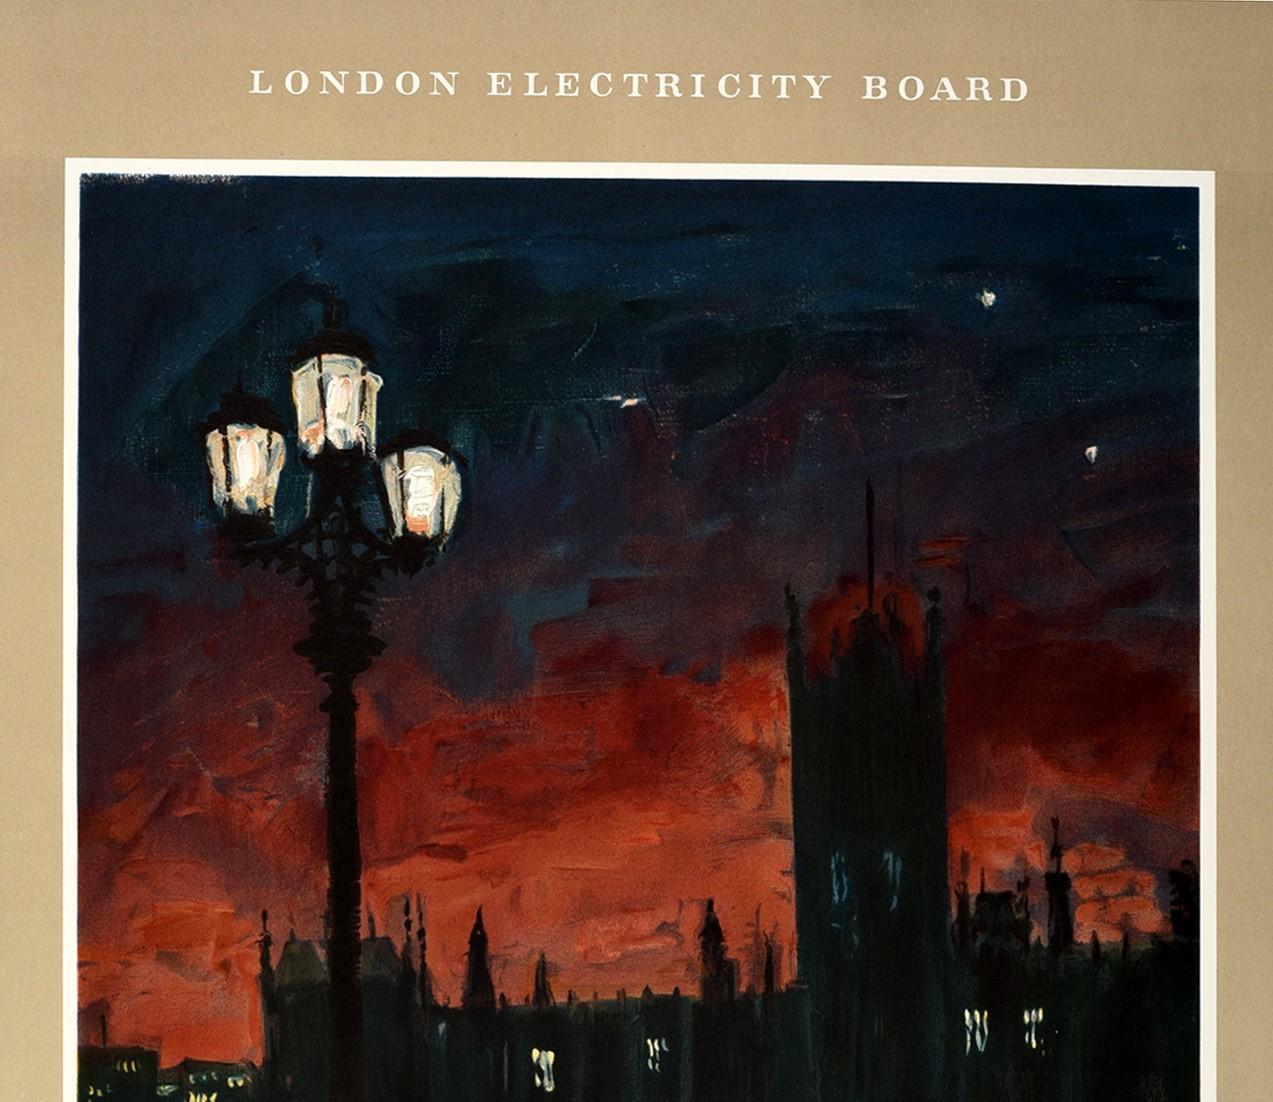 Original vintage London Electricity Board poster entitled The Power of London - with the black text missing on the border featuring fantastic artwork From the painting by Robin Darwin (1910-1974) showing the Houses of Parliament and Palace of